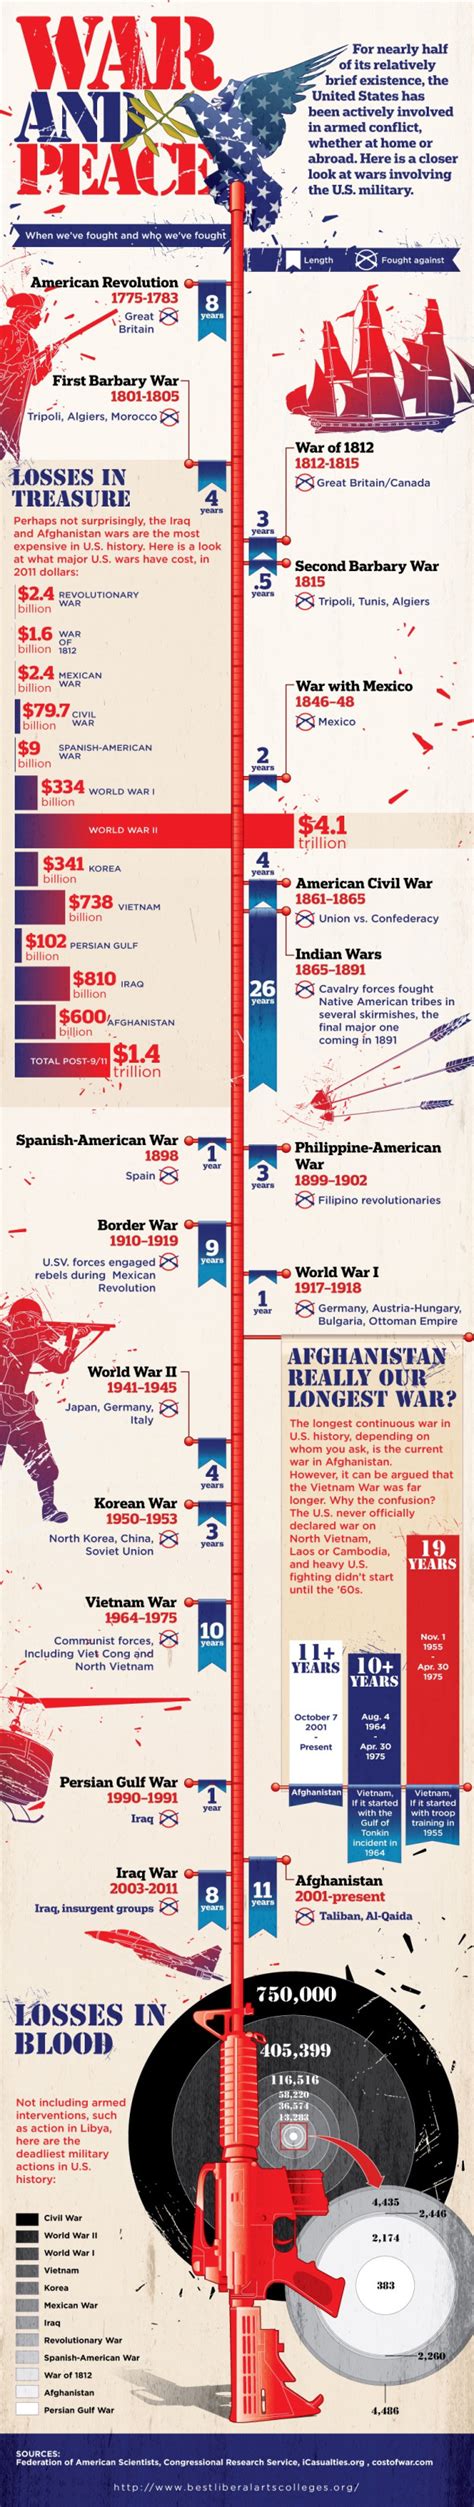 War And Peace Infographic War Peace History Infographic Teaching